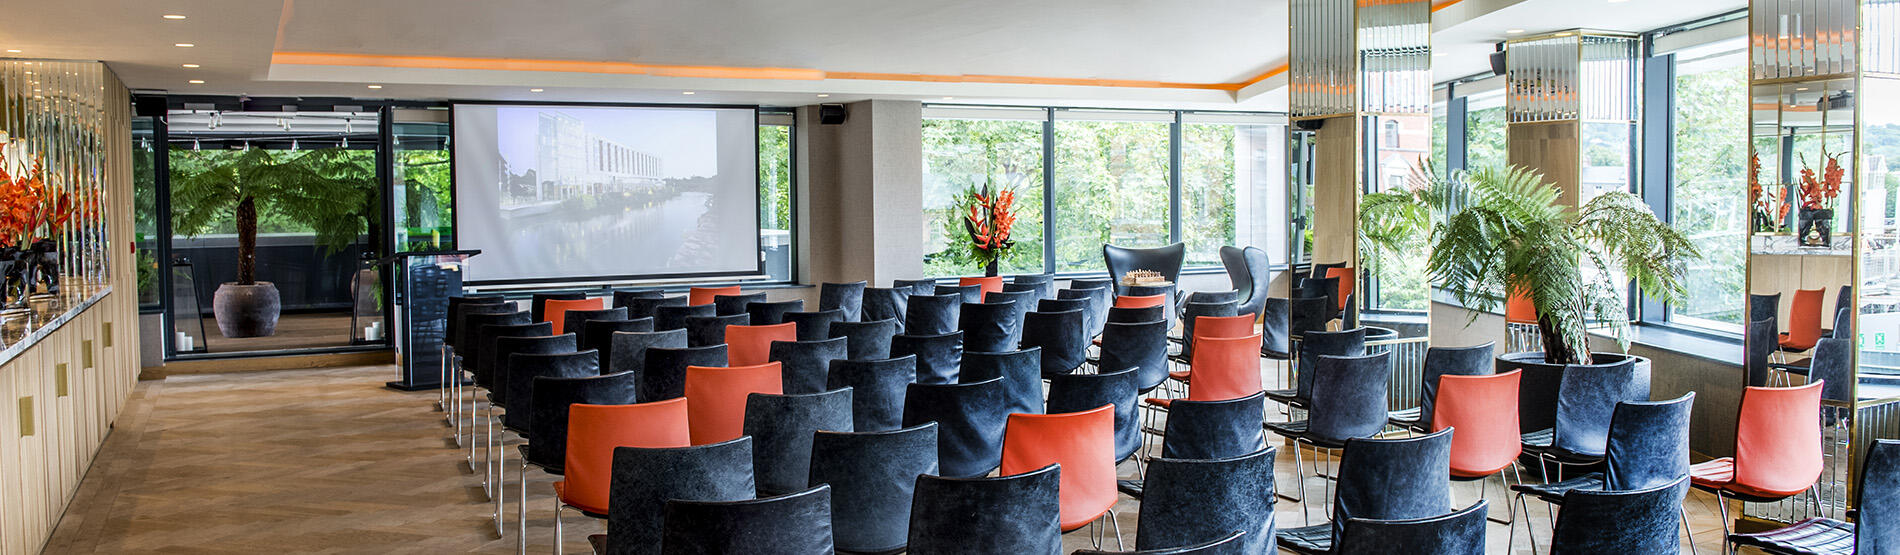 Meeting room with chairs and projector screen